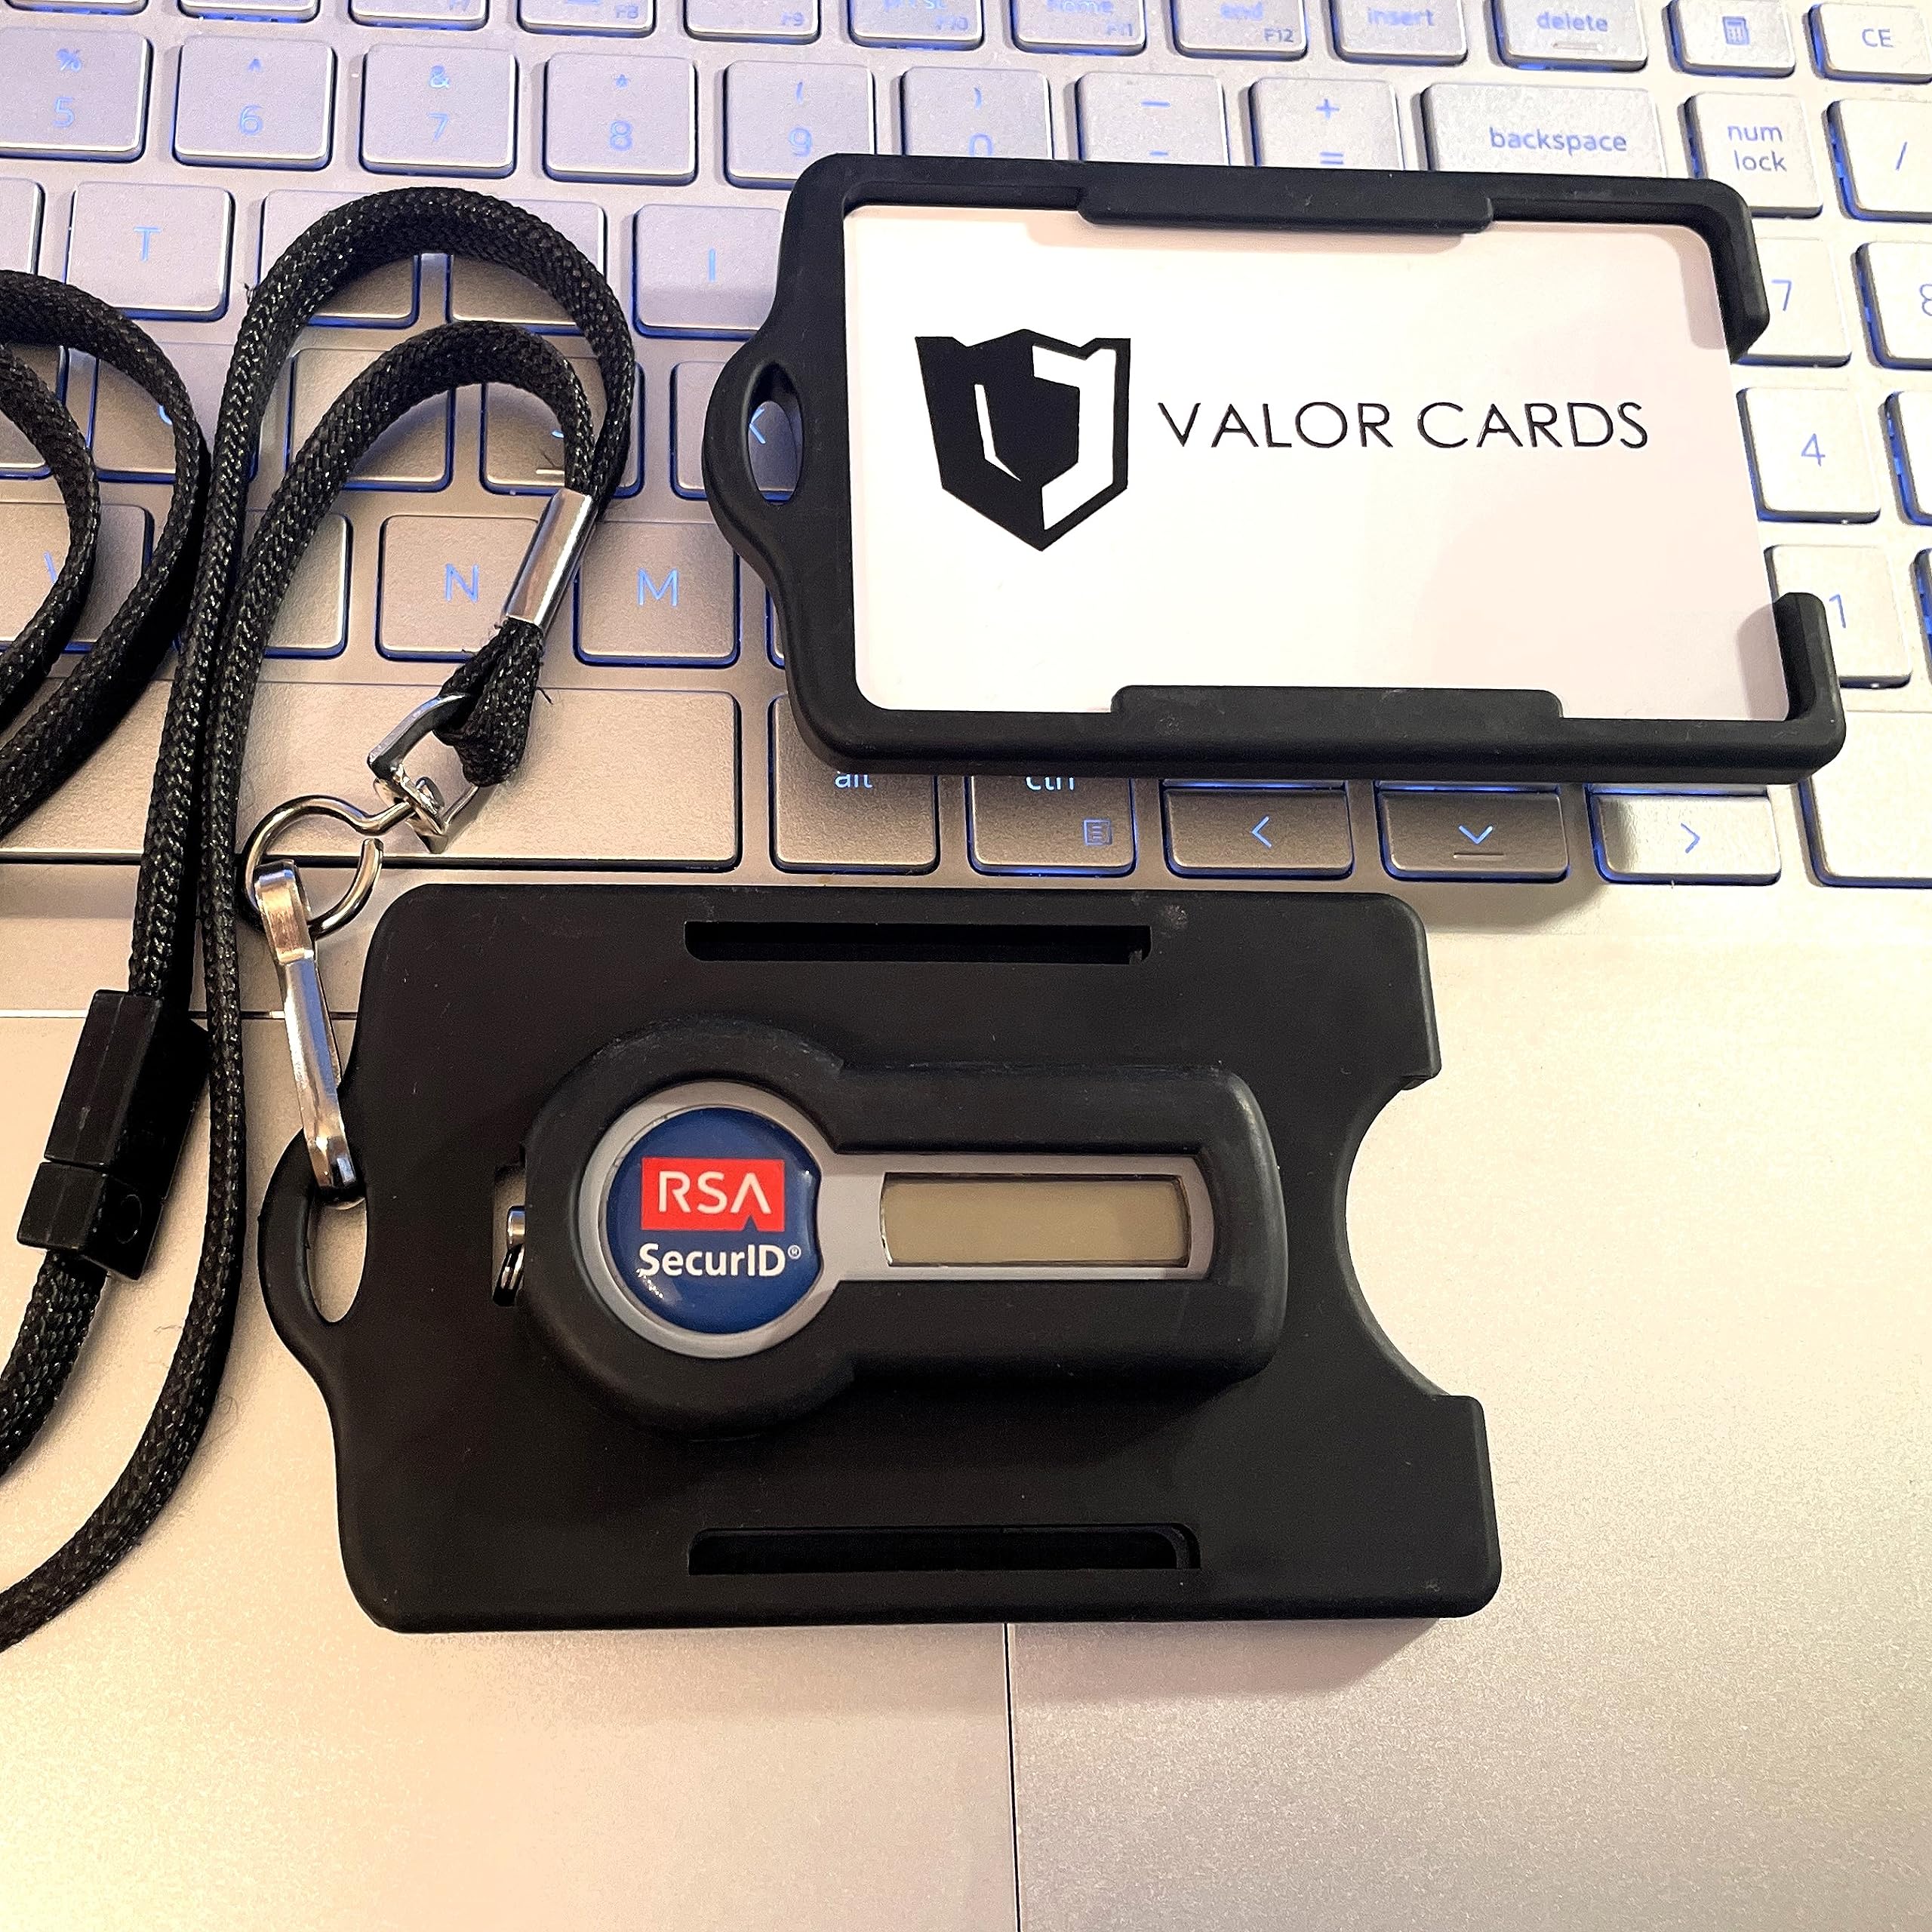 Valor Cards Newest 2023 Model RSA Token and ID Badge Holder - Smooth Finish and Nearly Indestructible (Onyx Black)